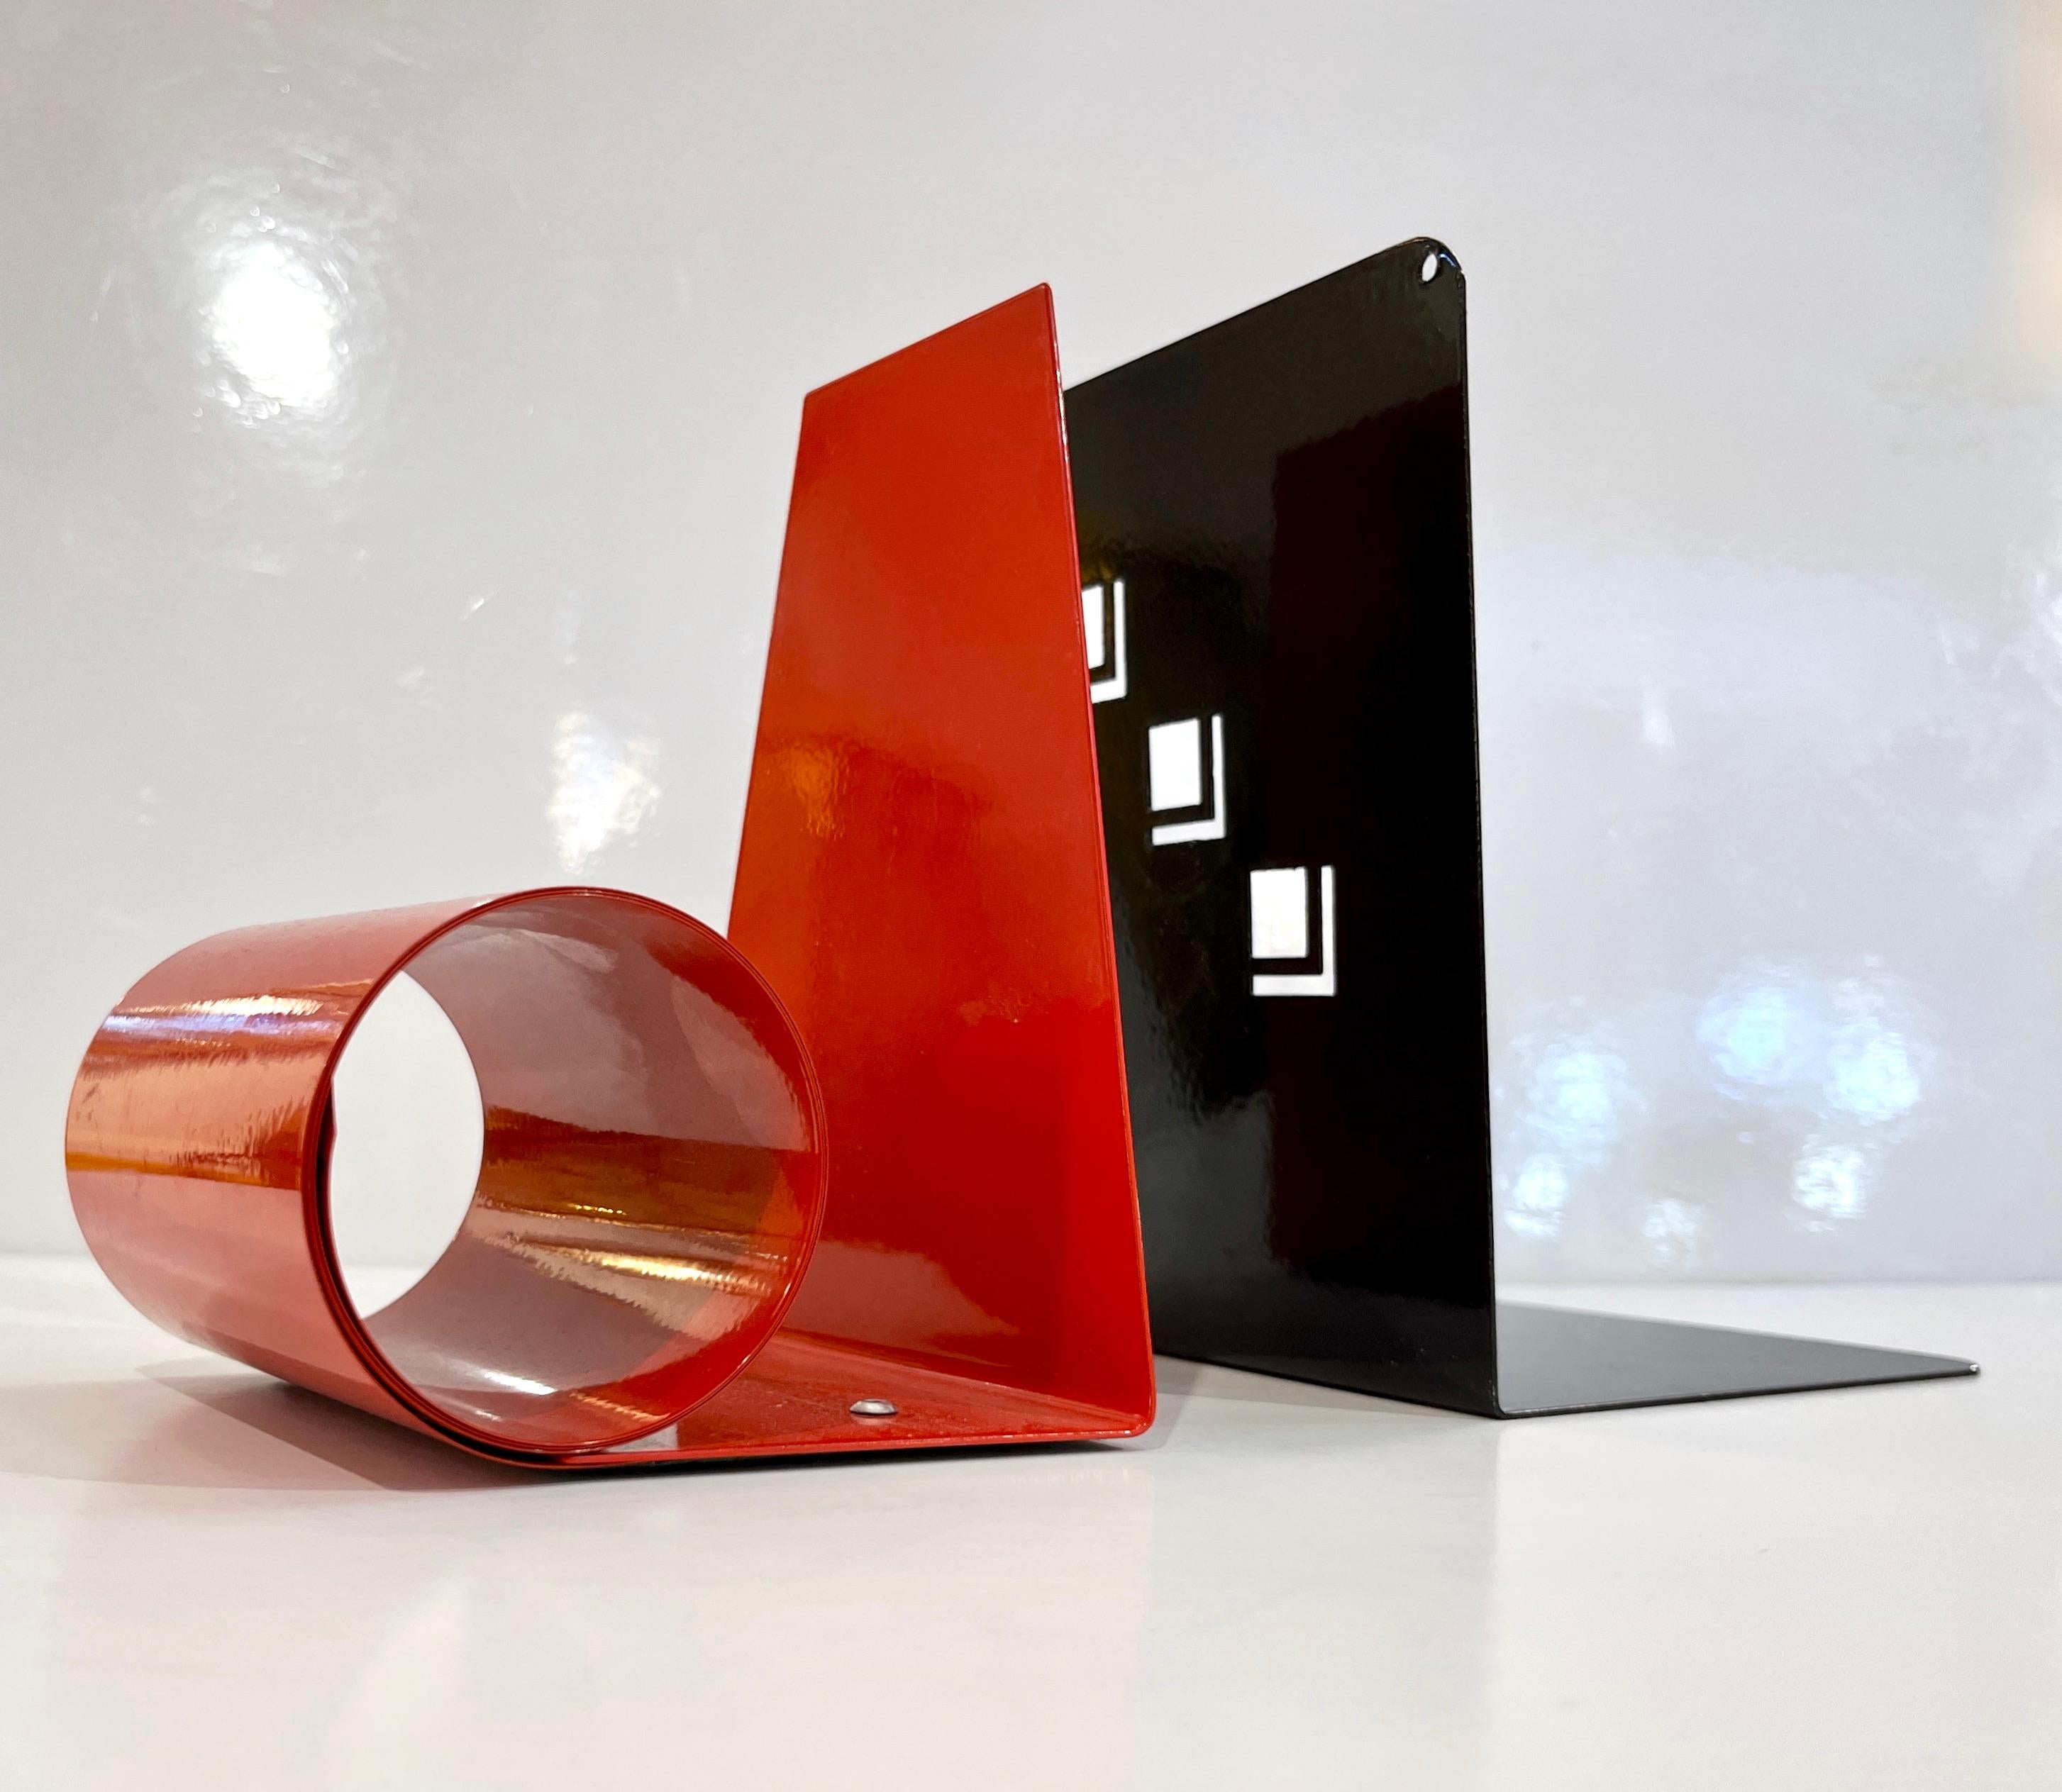 1970s Italian Vintage Red & Black Lacquered Metal Post-Modern Geometric Bookends For Sale 2